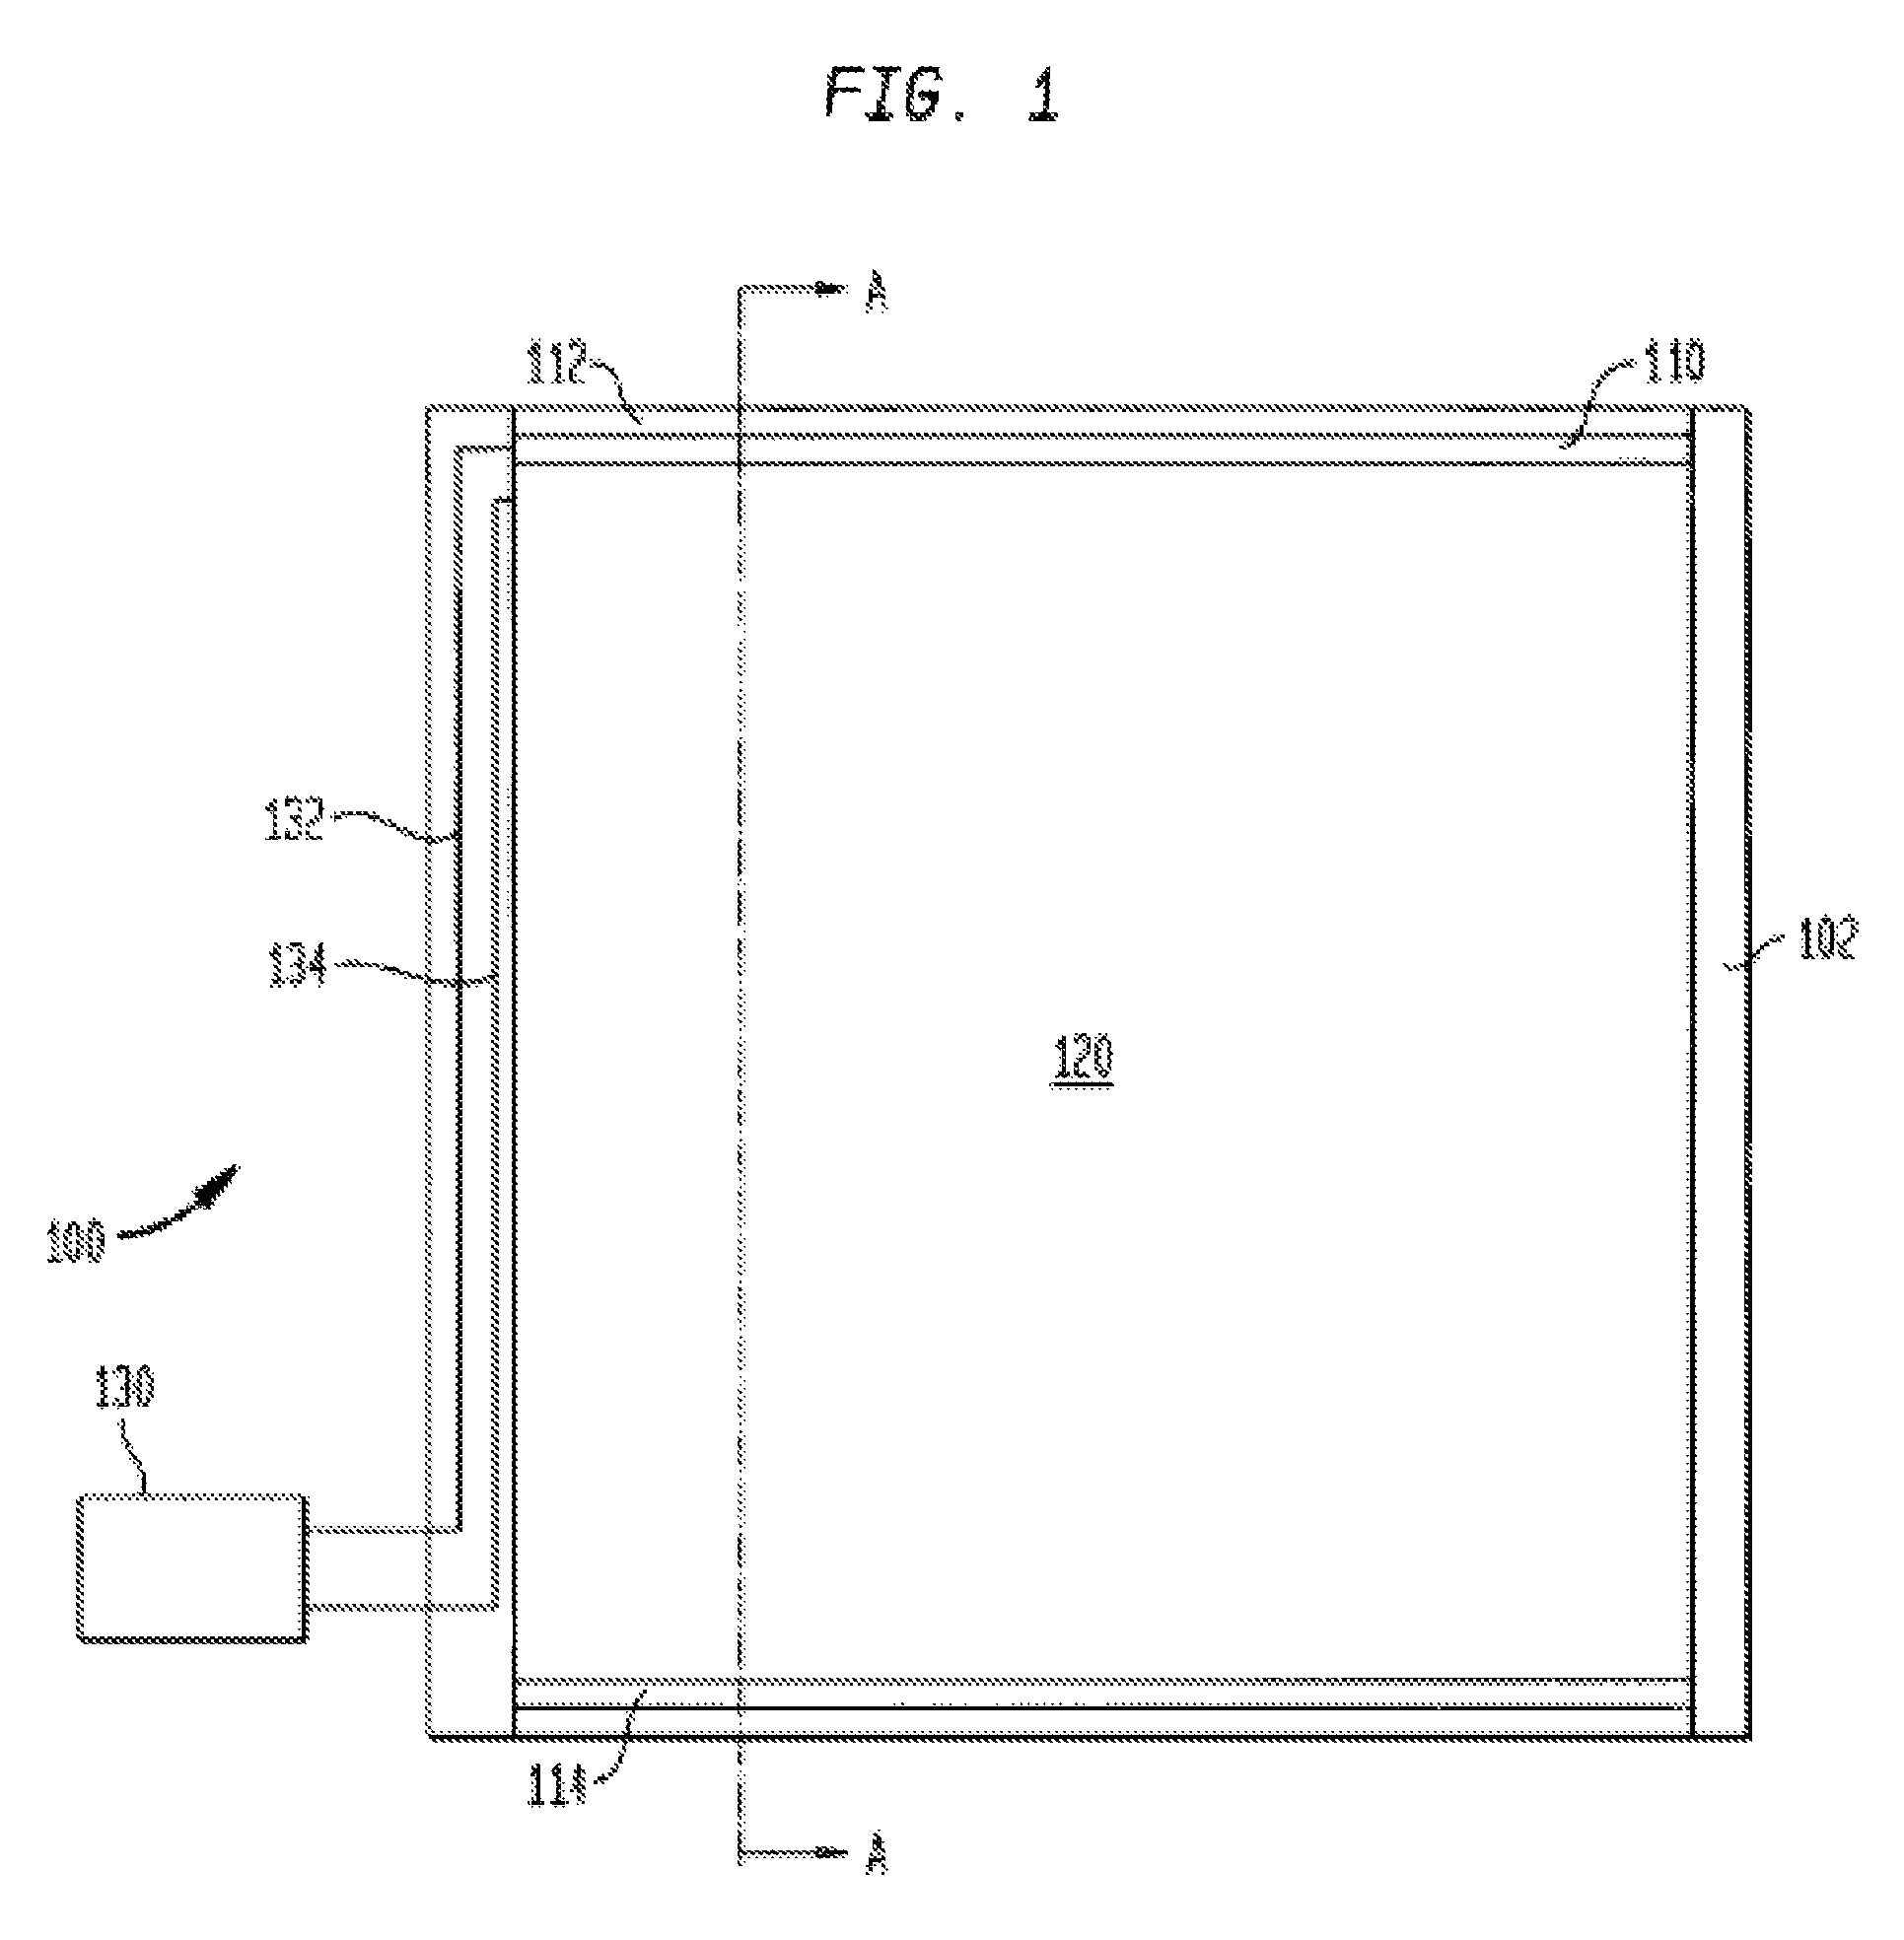 Insulated glazing unit and controller providing energy savings and privacy